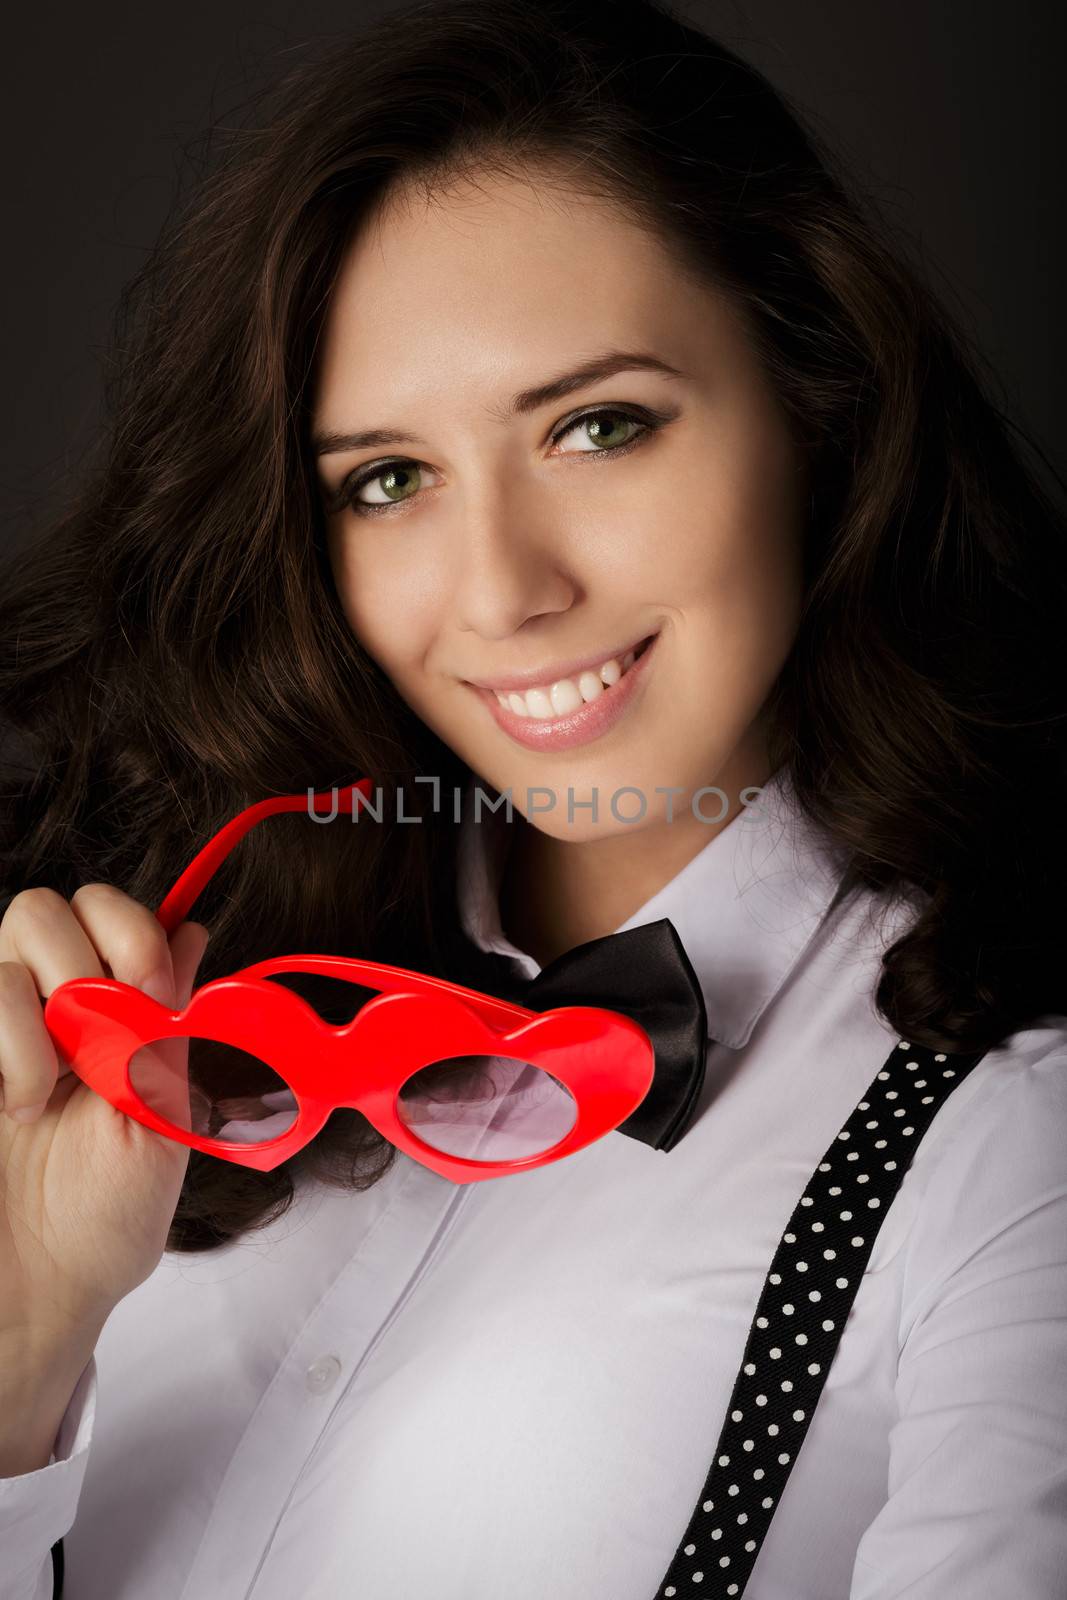 Girl Holding Heart-Shaped Glasses by NicoletaIonescu